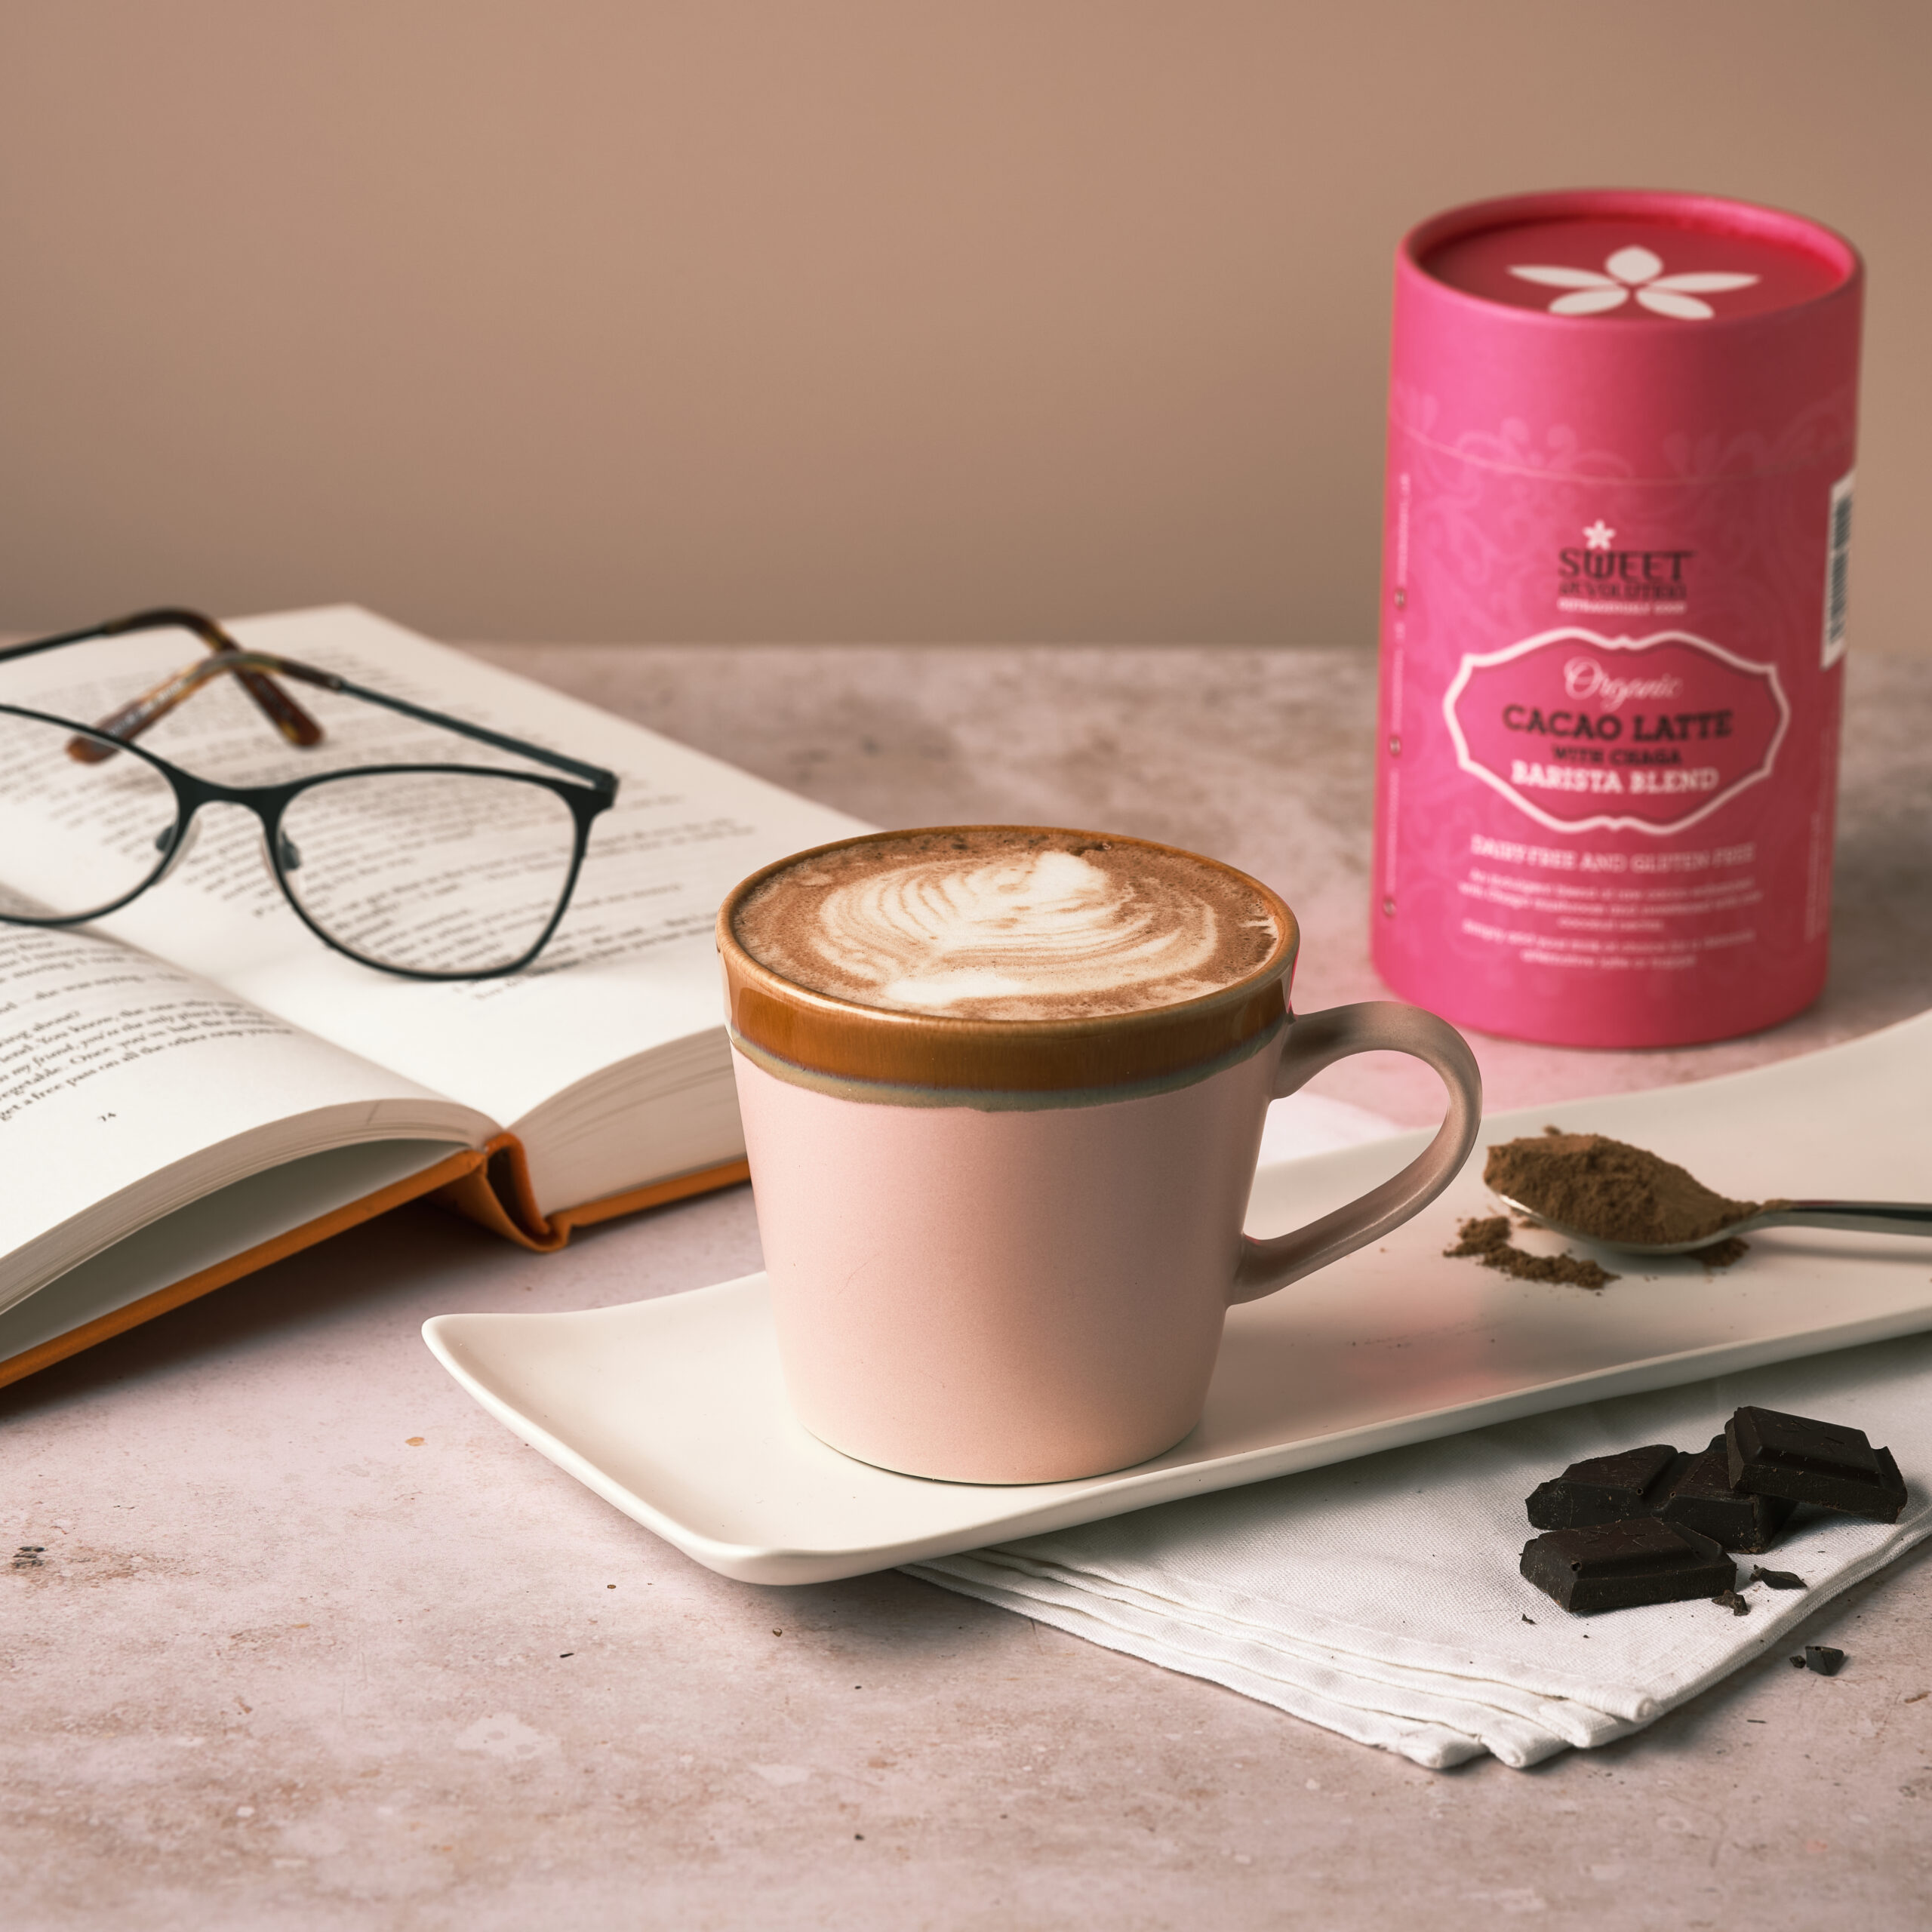 Lifestyle – Cacao Latte with tub